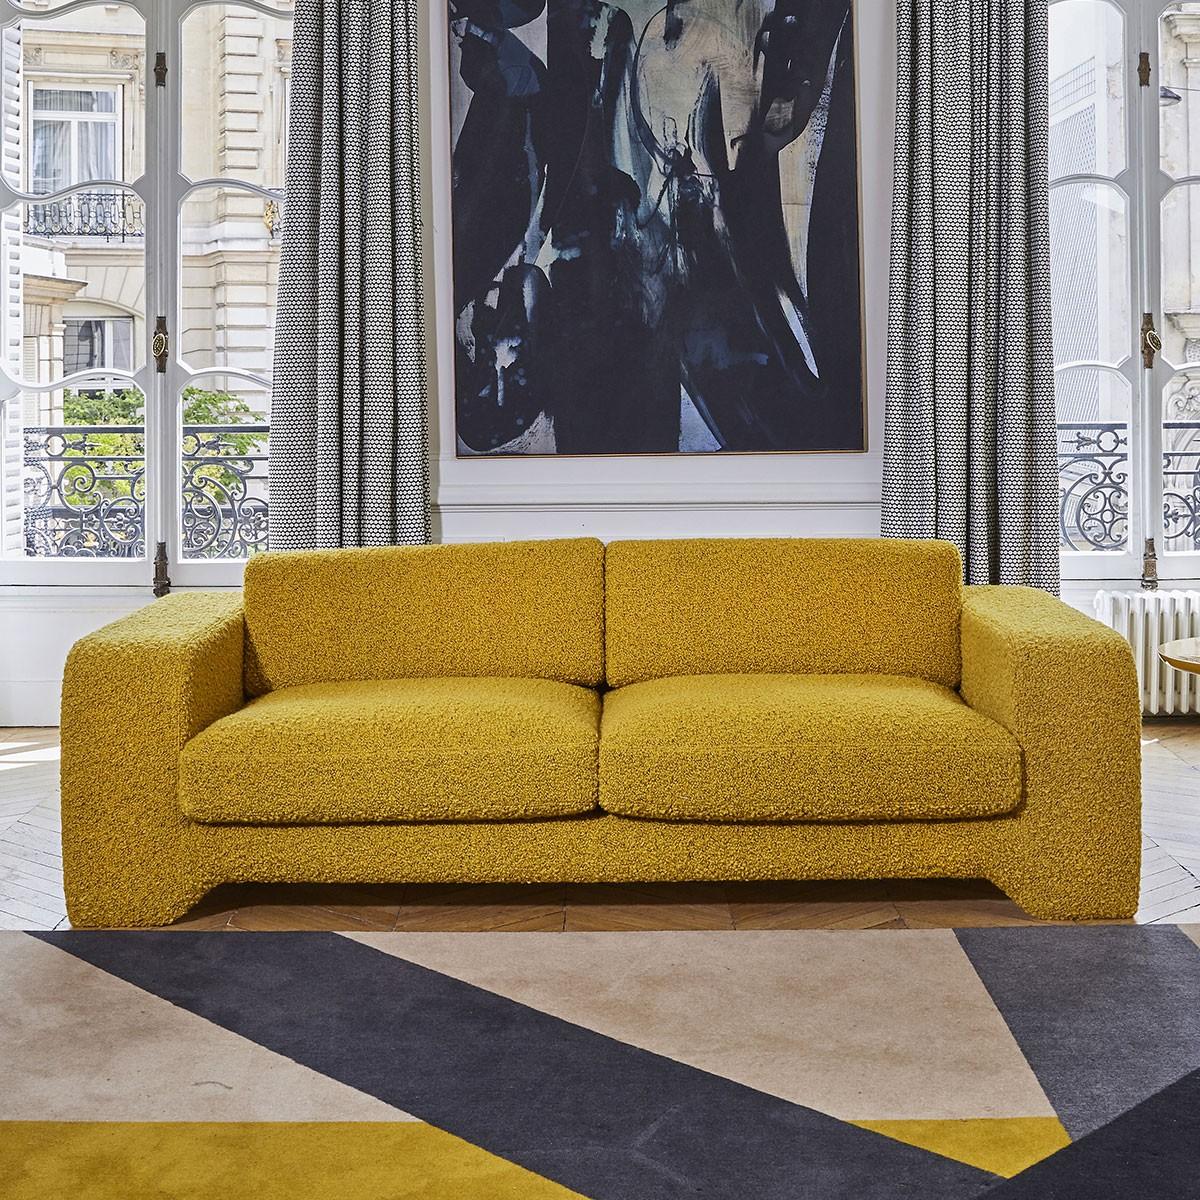 Popus Editions Giovanna 2.5 seater sofa in gray Verone velvet upholstery

Giovanna is a sofa with a strong profile. A sober, plush line, with this famous detail that changes everything, so as not to forget its strength of character and this